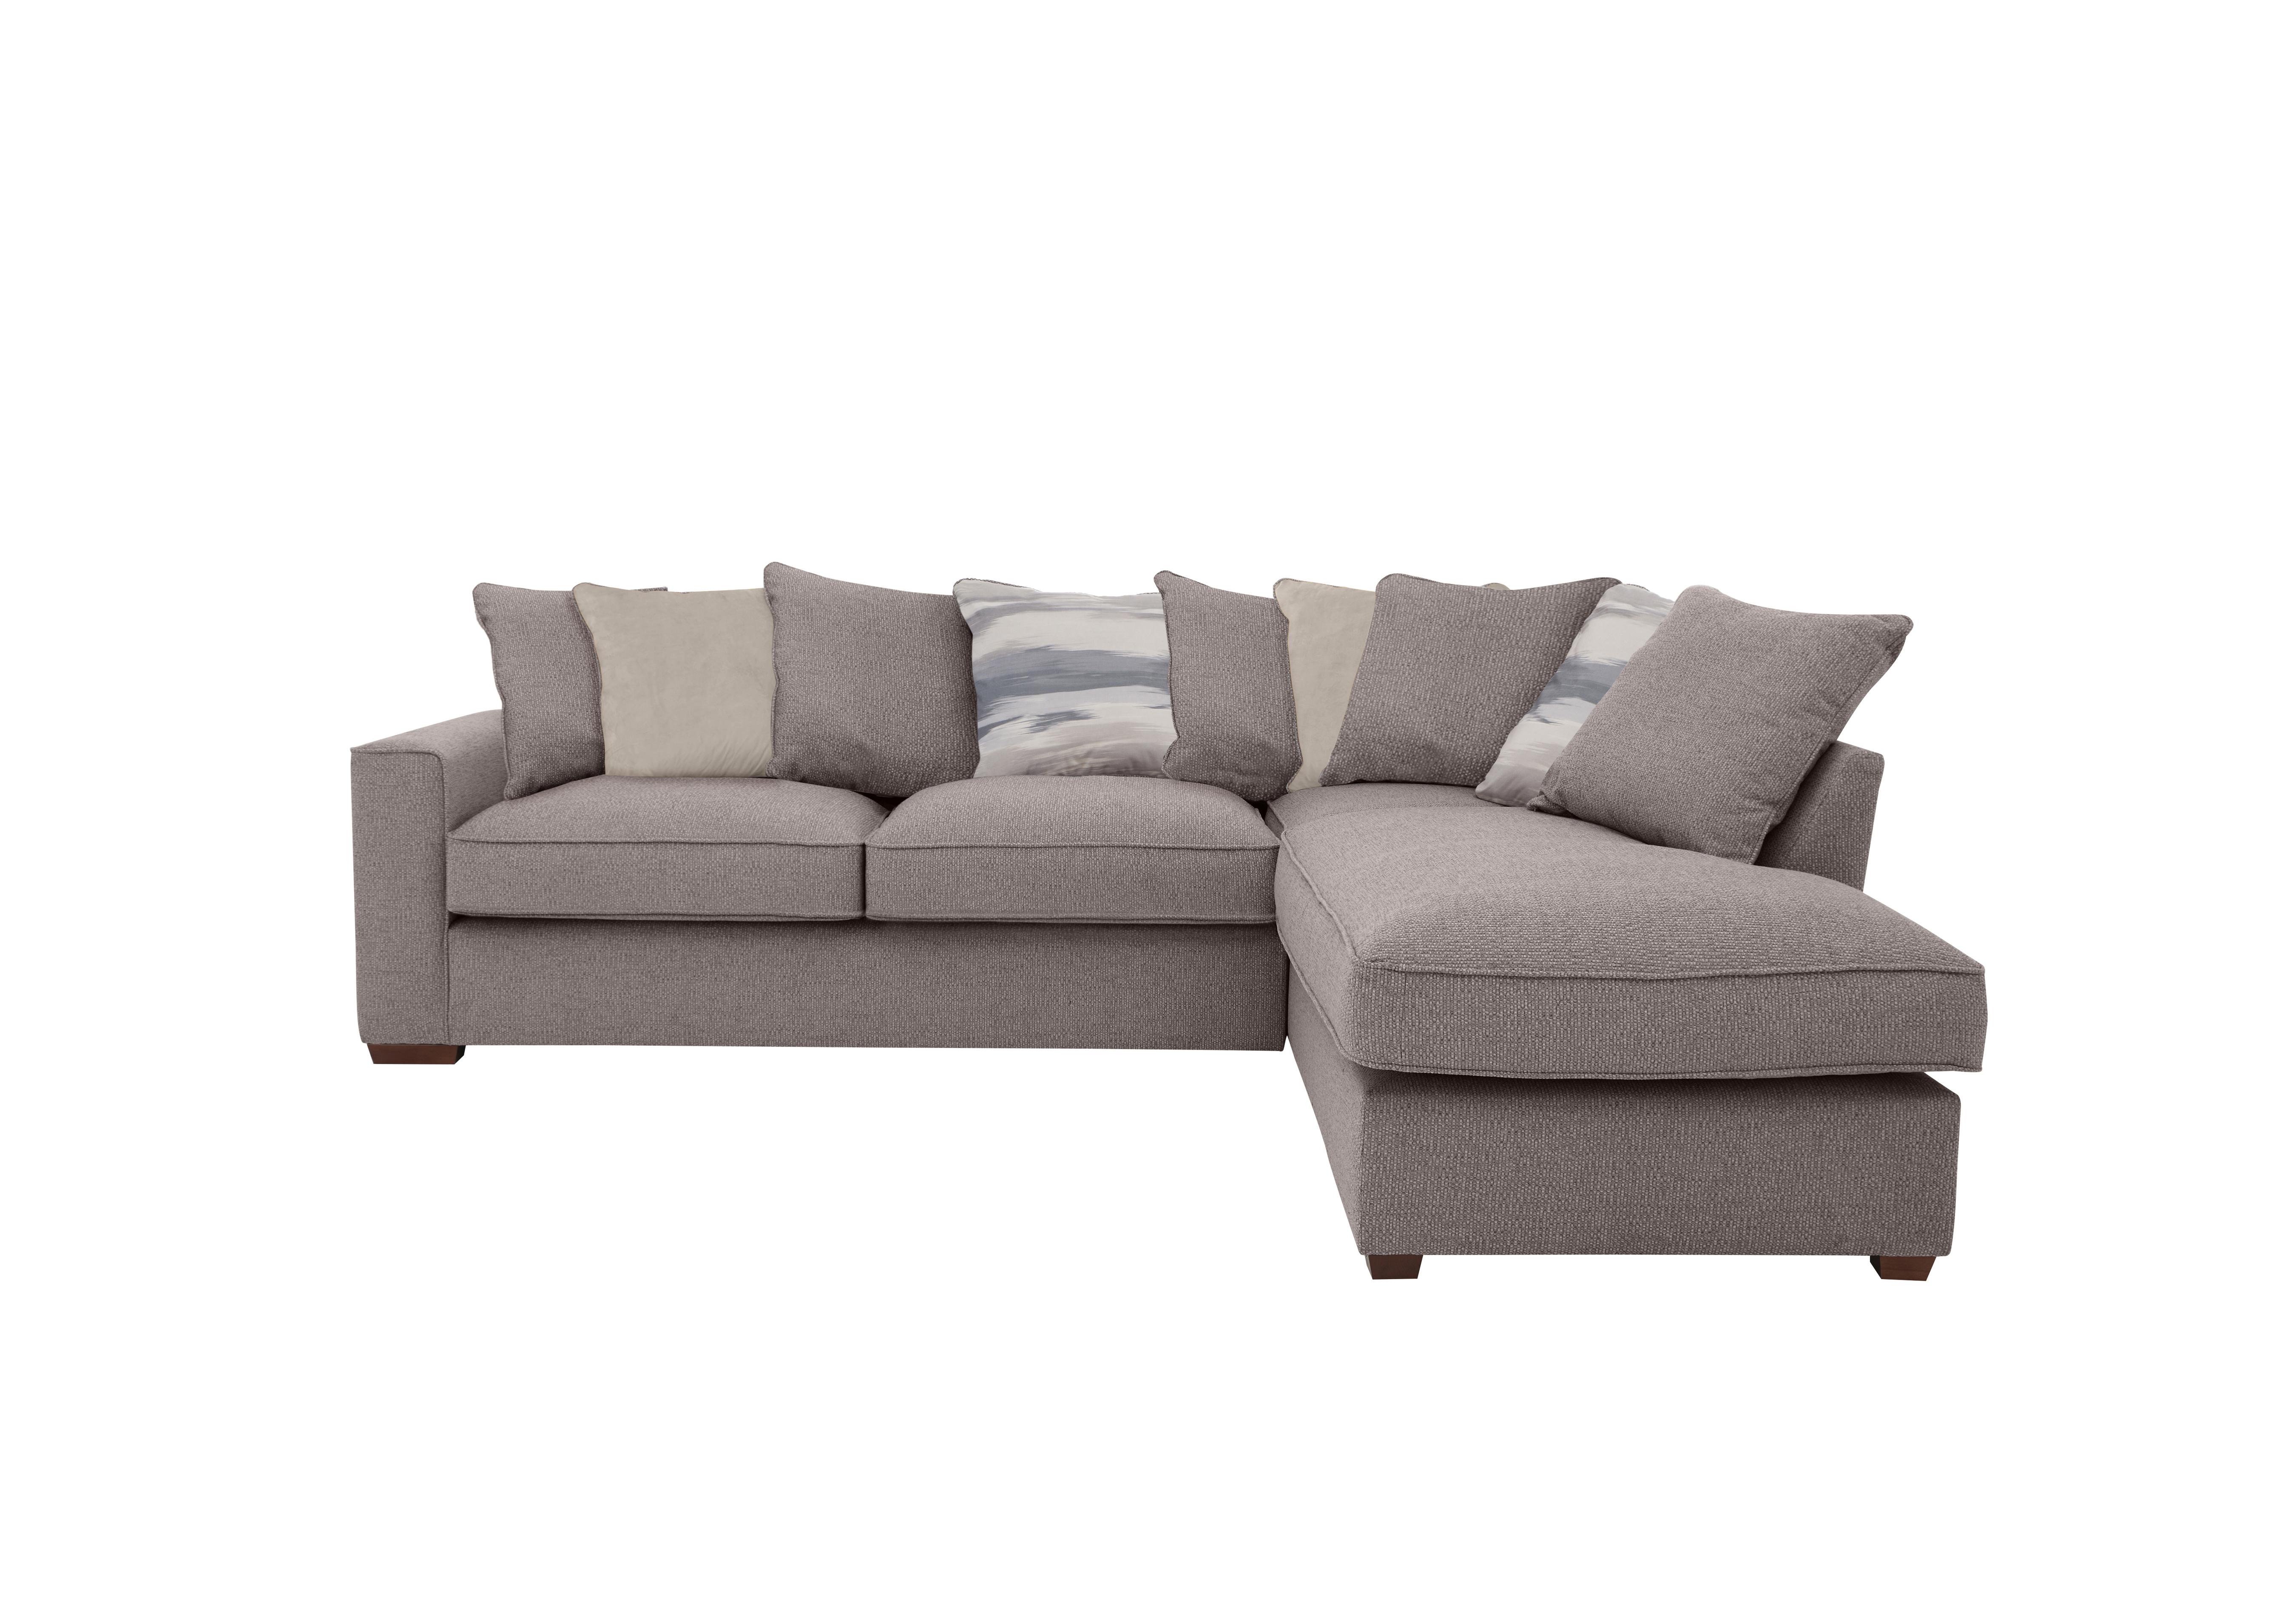 Cory Fabric Corner Chaise Scatter Back Sofa Bed in Dallas Taupe Taupe Pack on Furniture Village